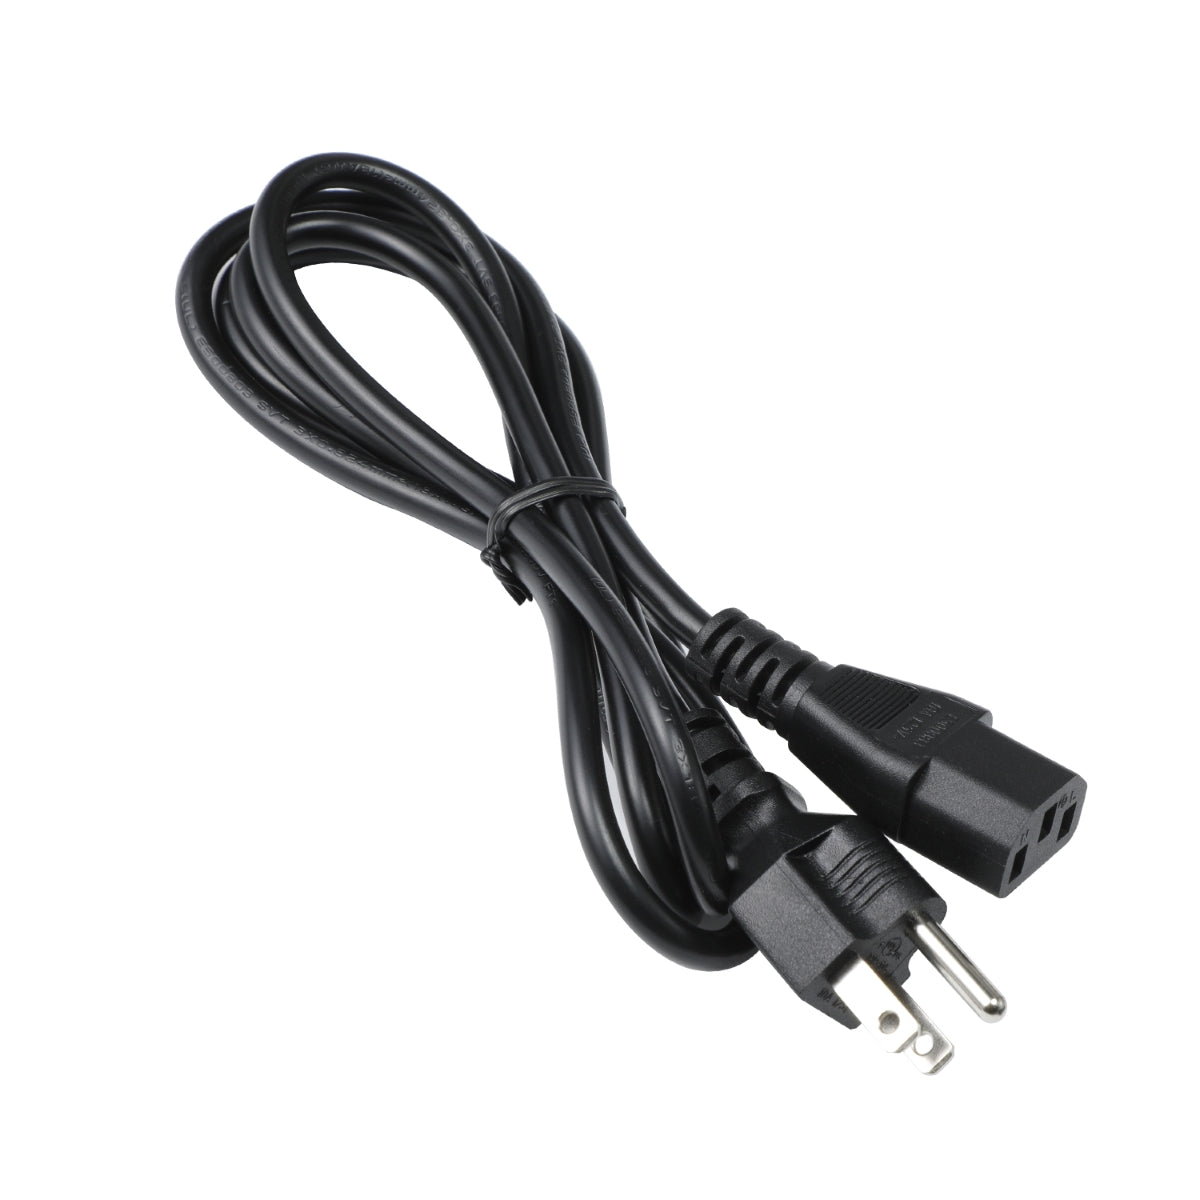 Power Cord for HP Pavilion 550-130 Computer.